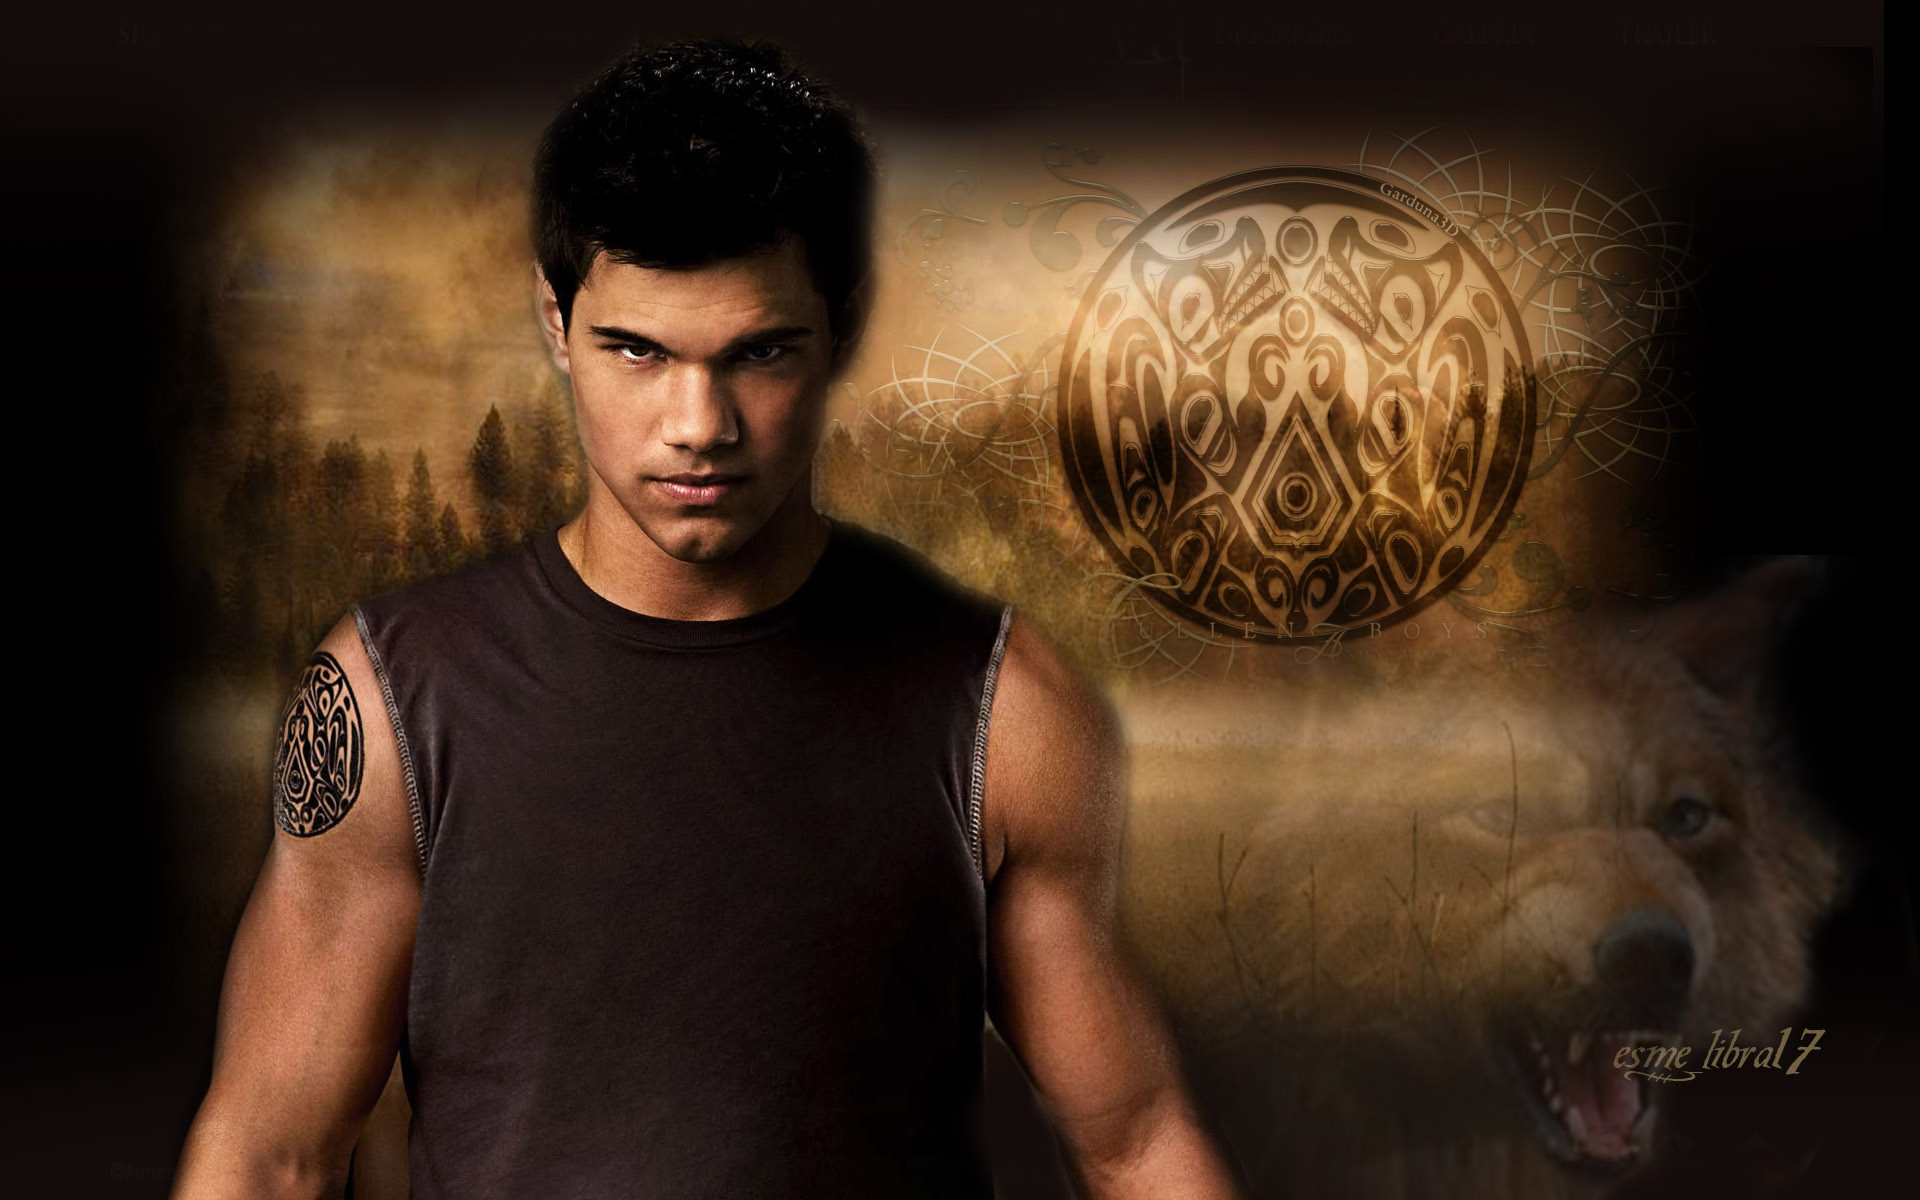 1920x1200 HD Wallpaper and background photos of jacob black for fans of twilight  CrepÃºsculo images.